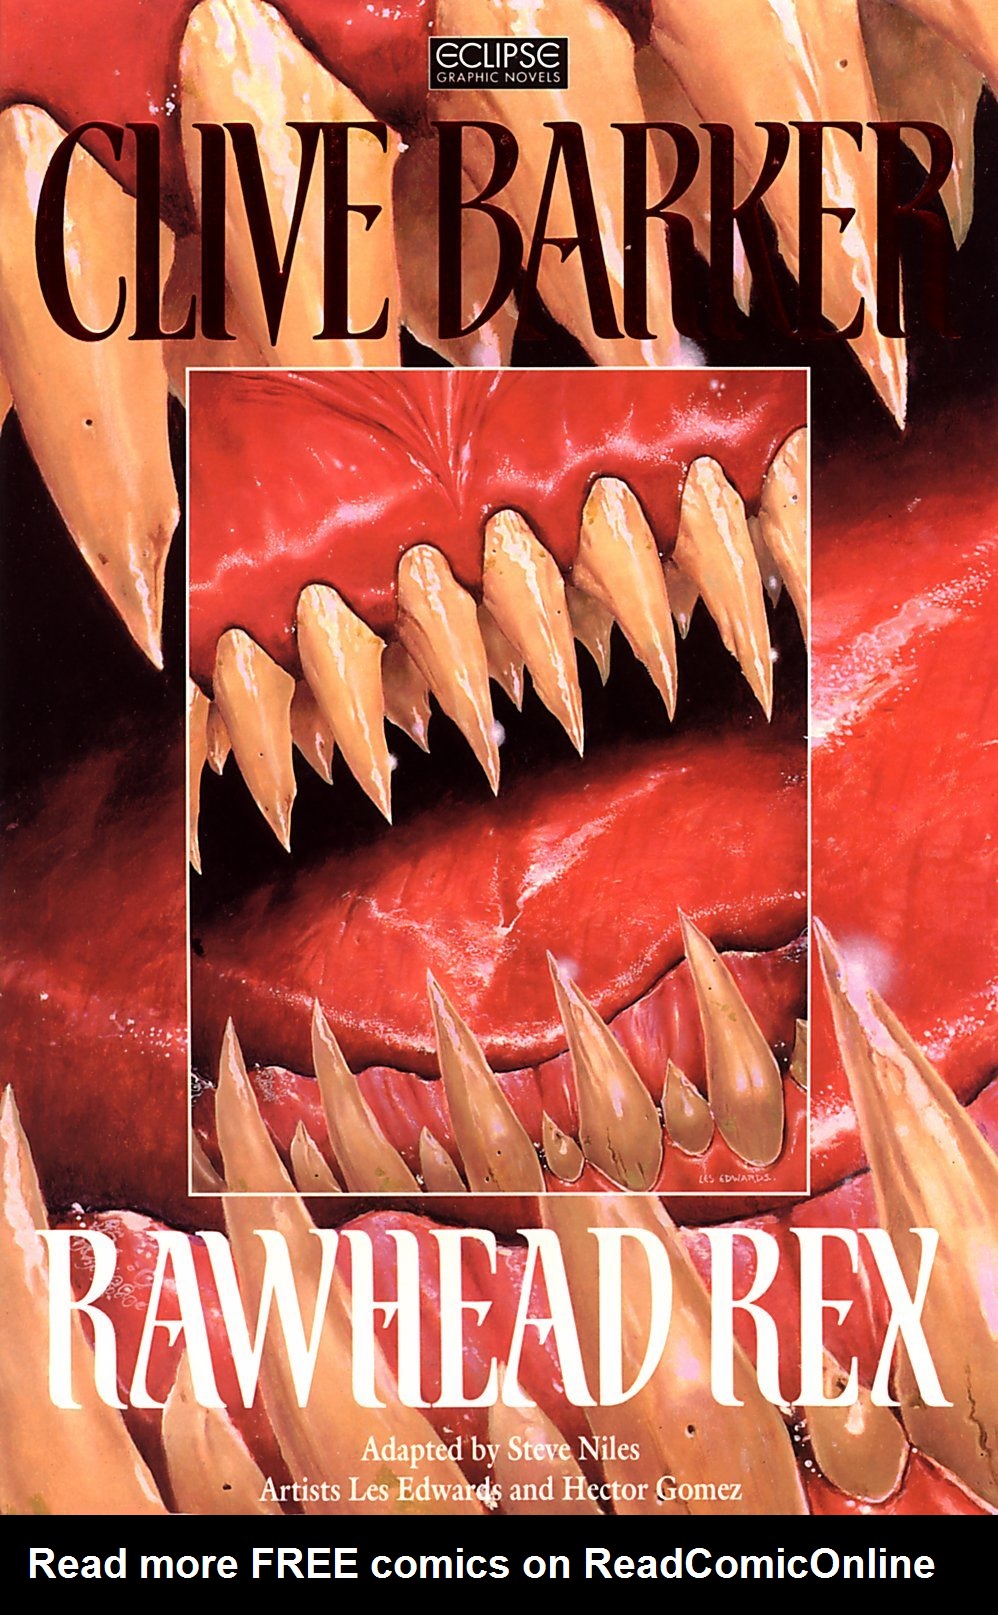 Read online Clive Barker's Rawhead Rex comic -  Issue # TPB - 1